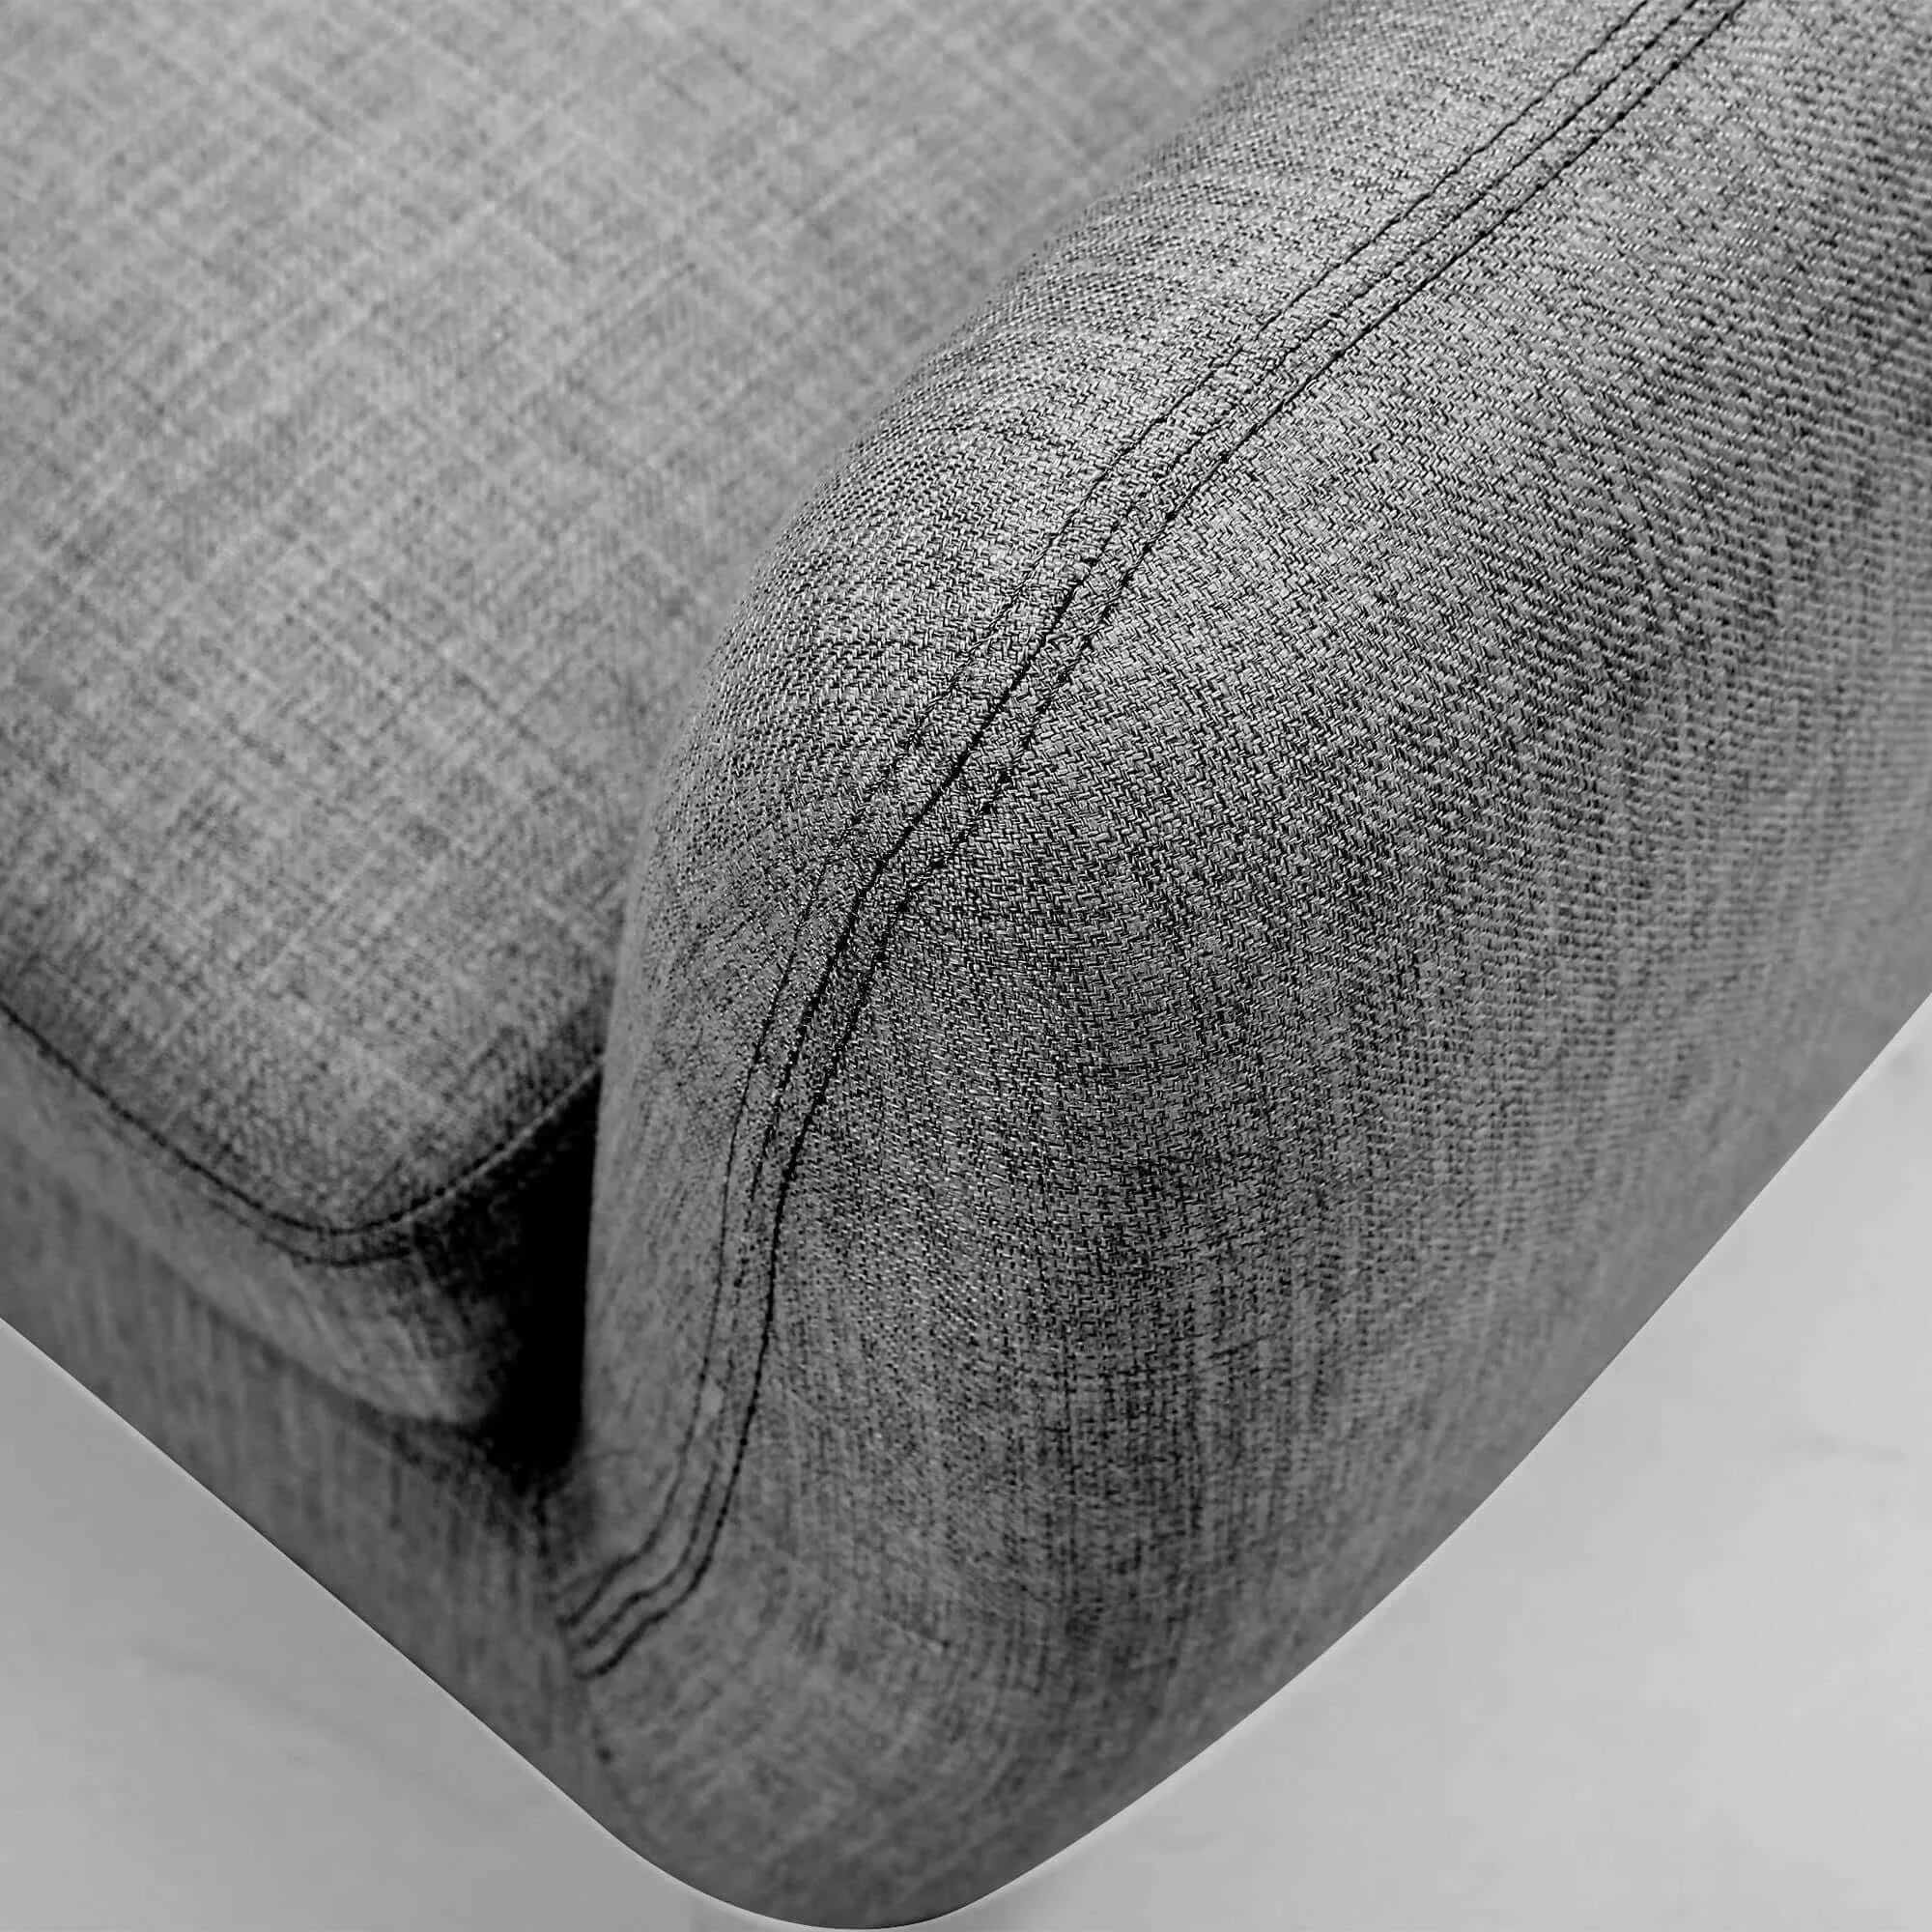 Buy dane 3 + 1 + 1 seater fabric upholstered sofa armchair lounge couch - mid grey - upinteriors-Upinteriors